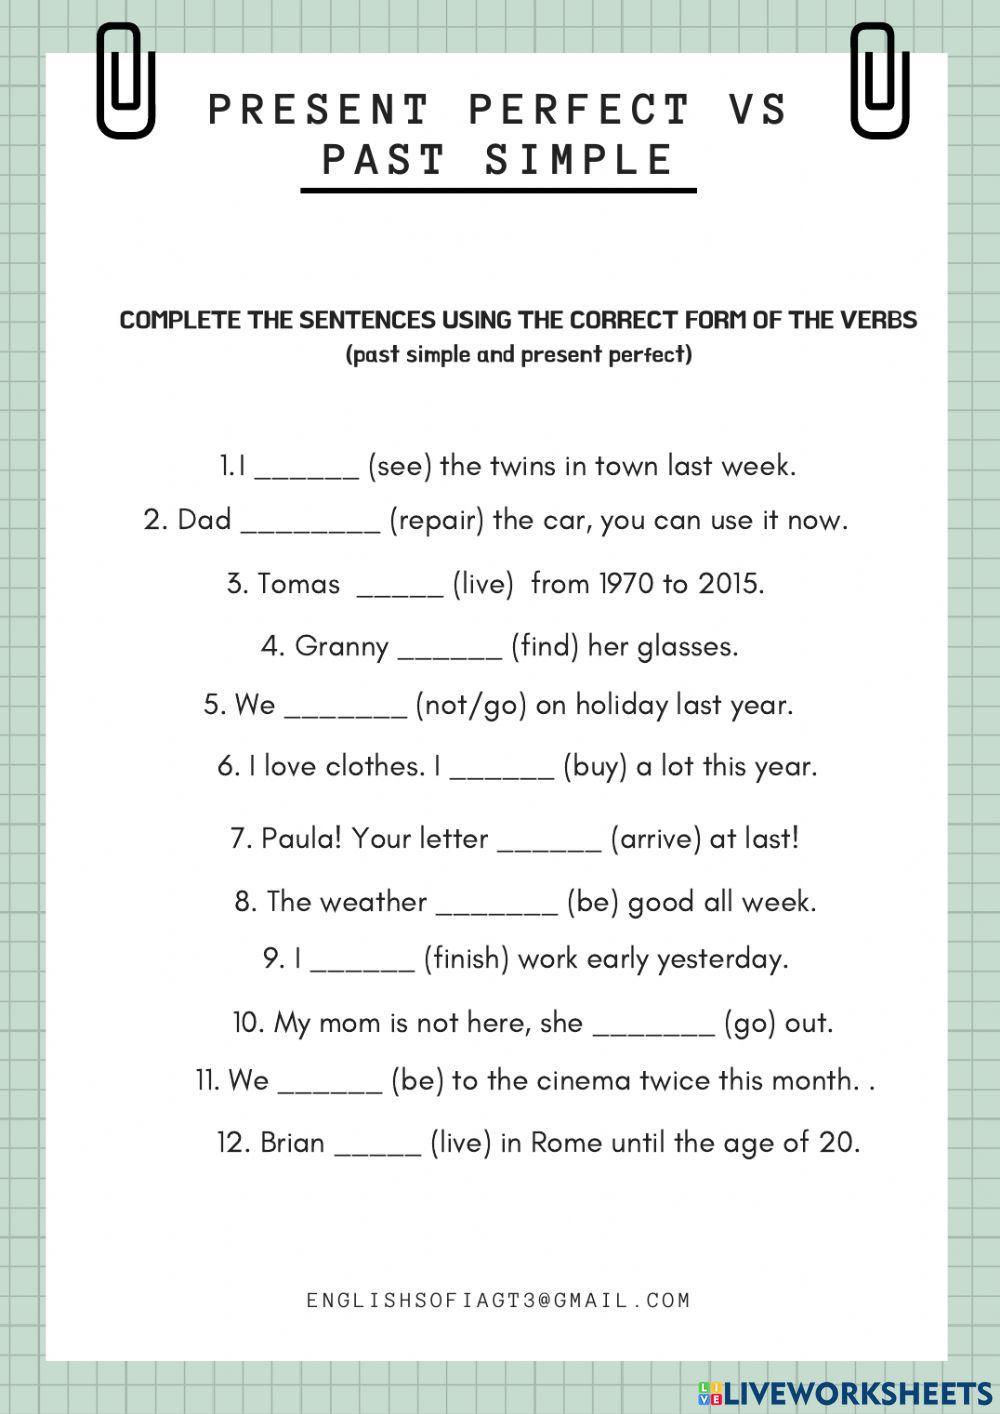 Present perfect vs past simple exercise for A2 | Live Worksheets